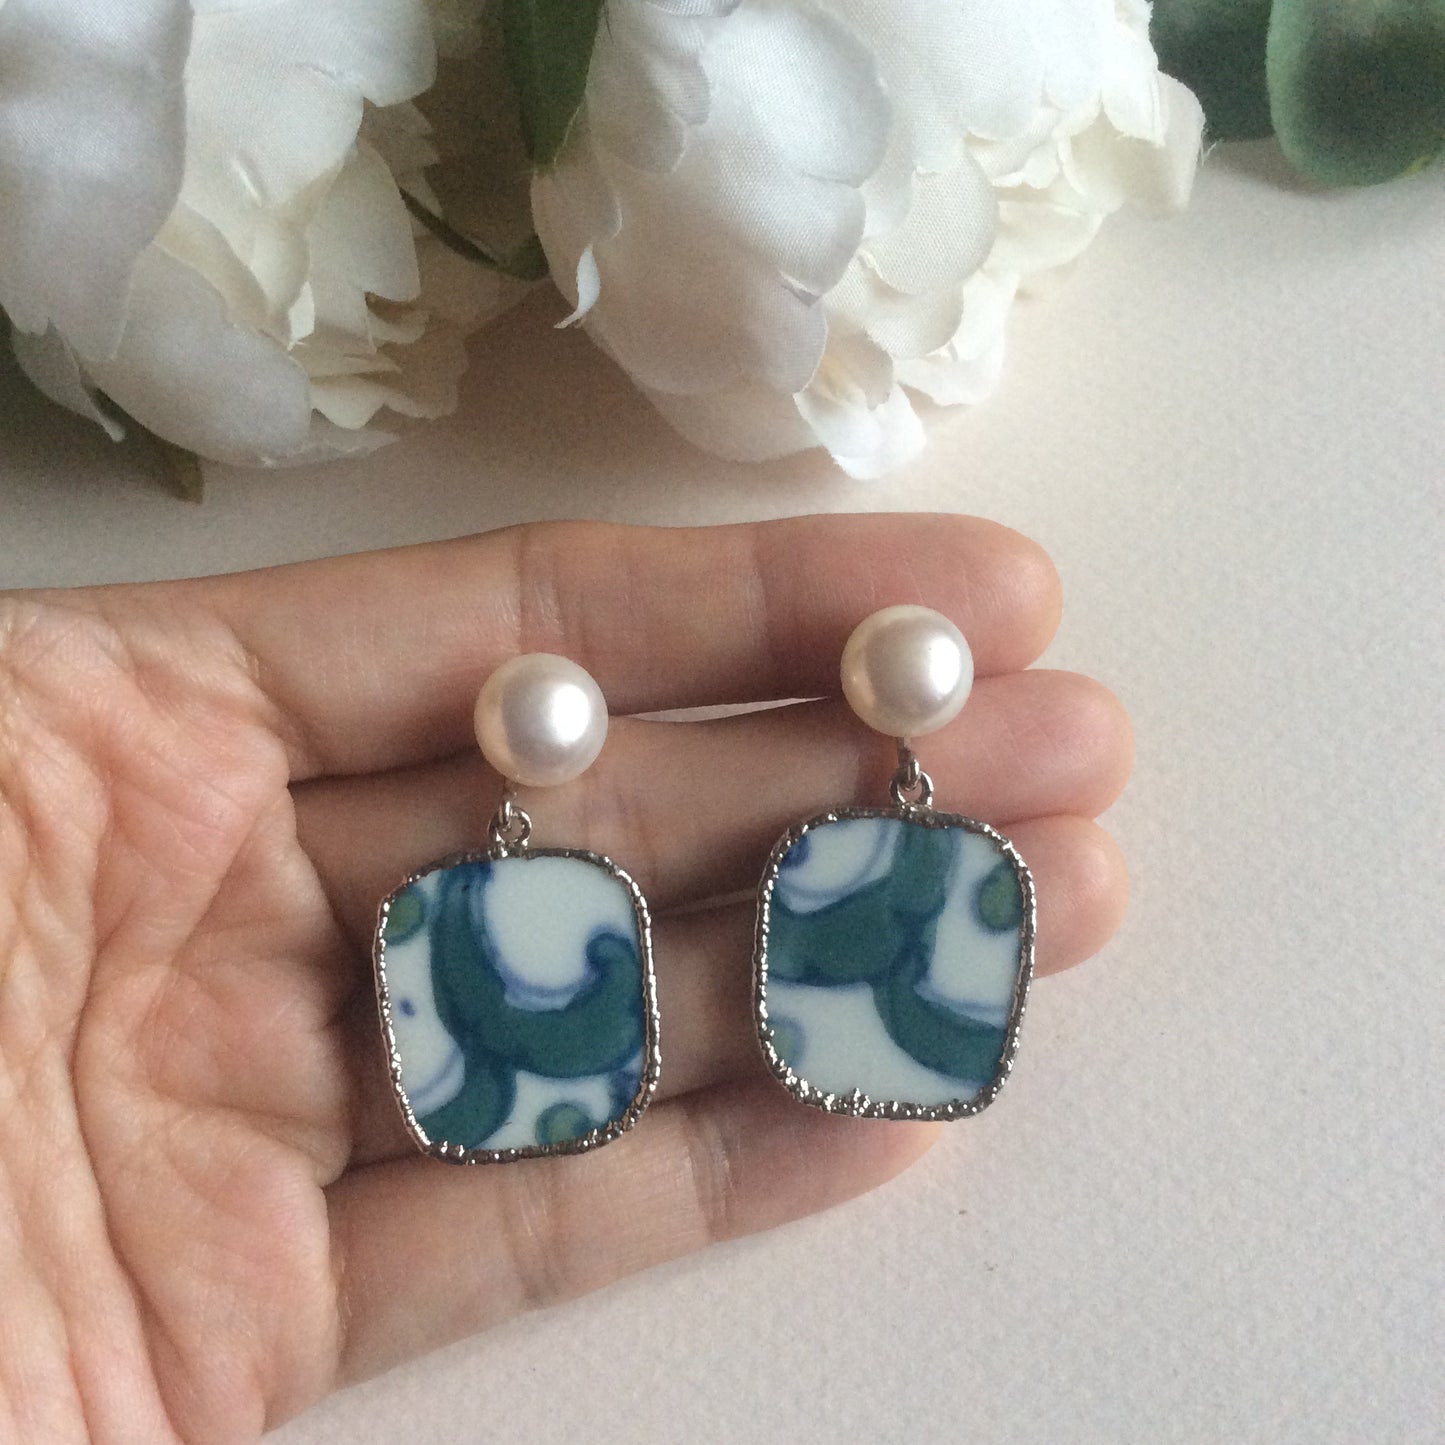 Abstract green and white porcelain earrings with FW pearls